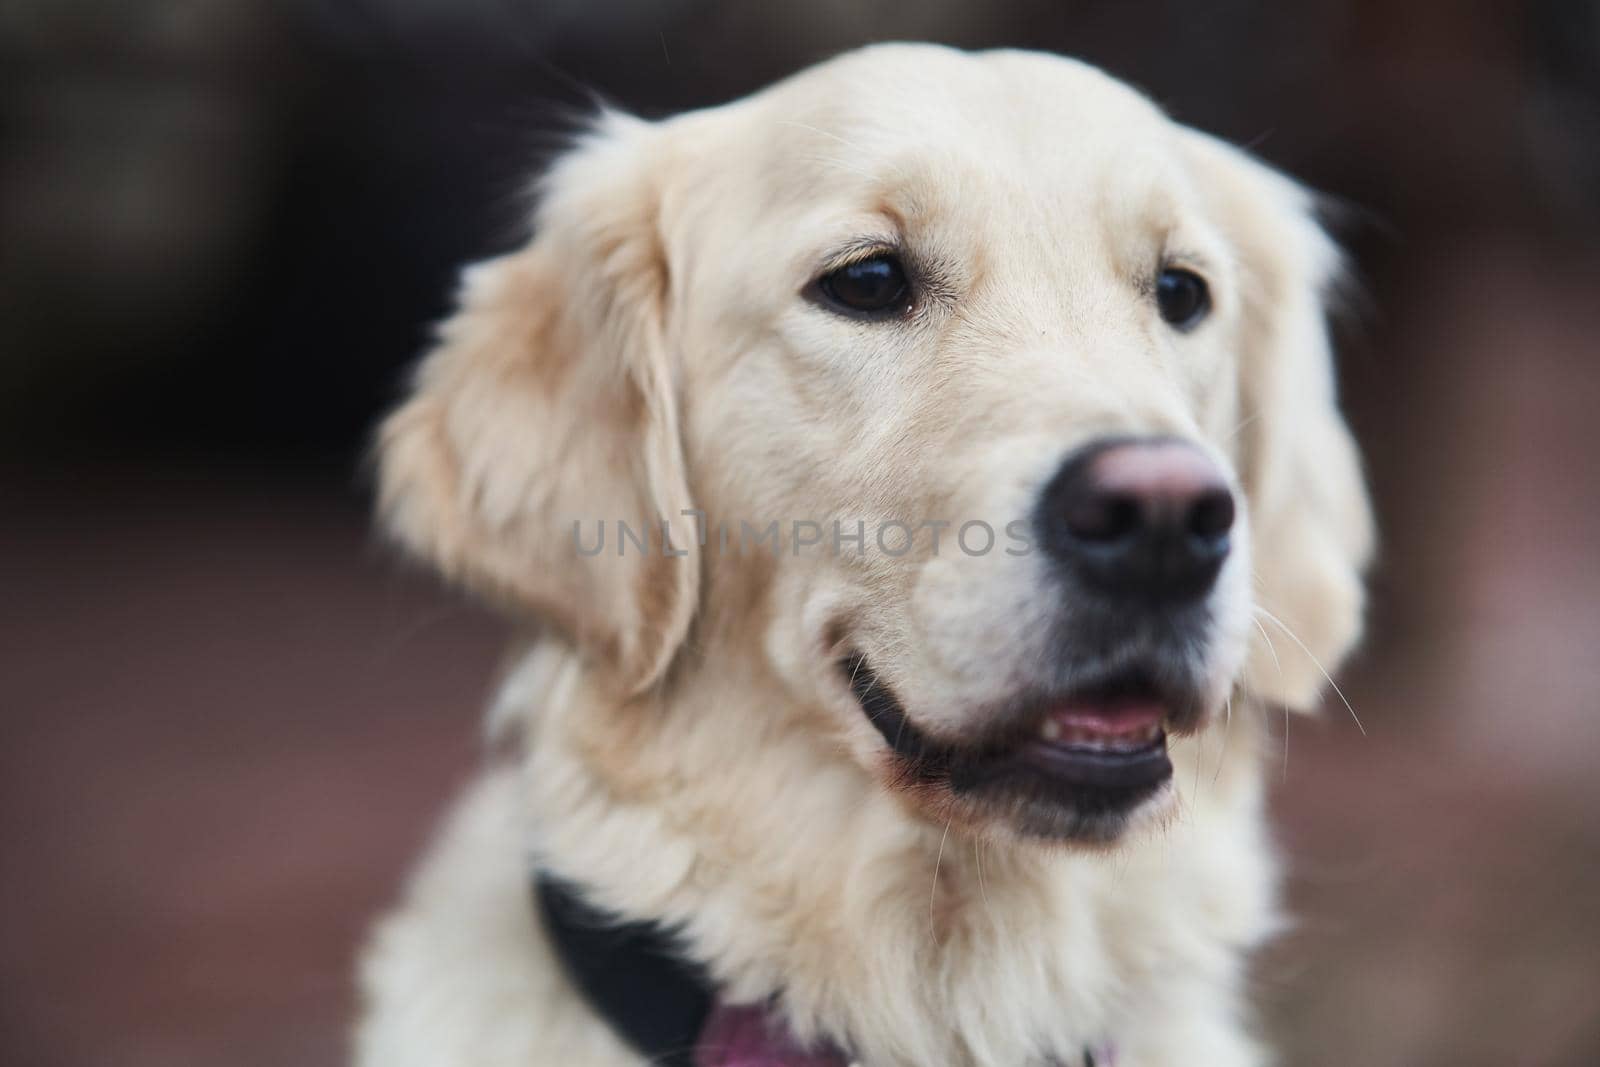 Golden Labrador Retriever with a collar sitting on the street. Close-up